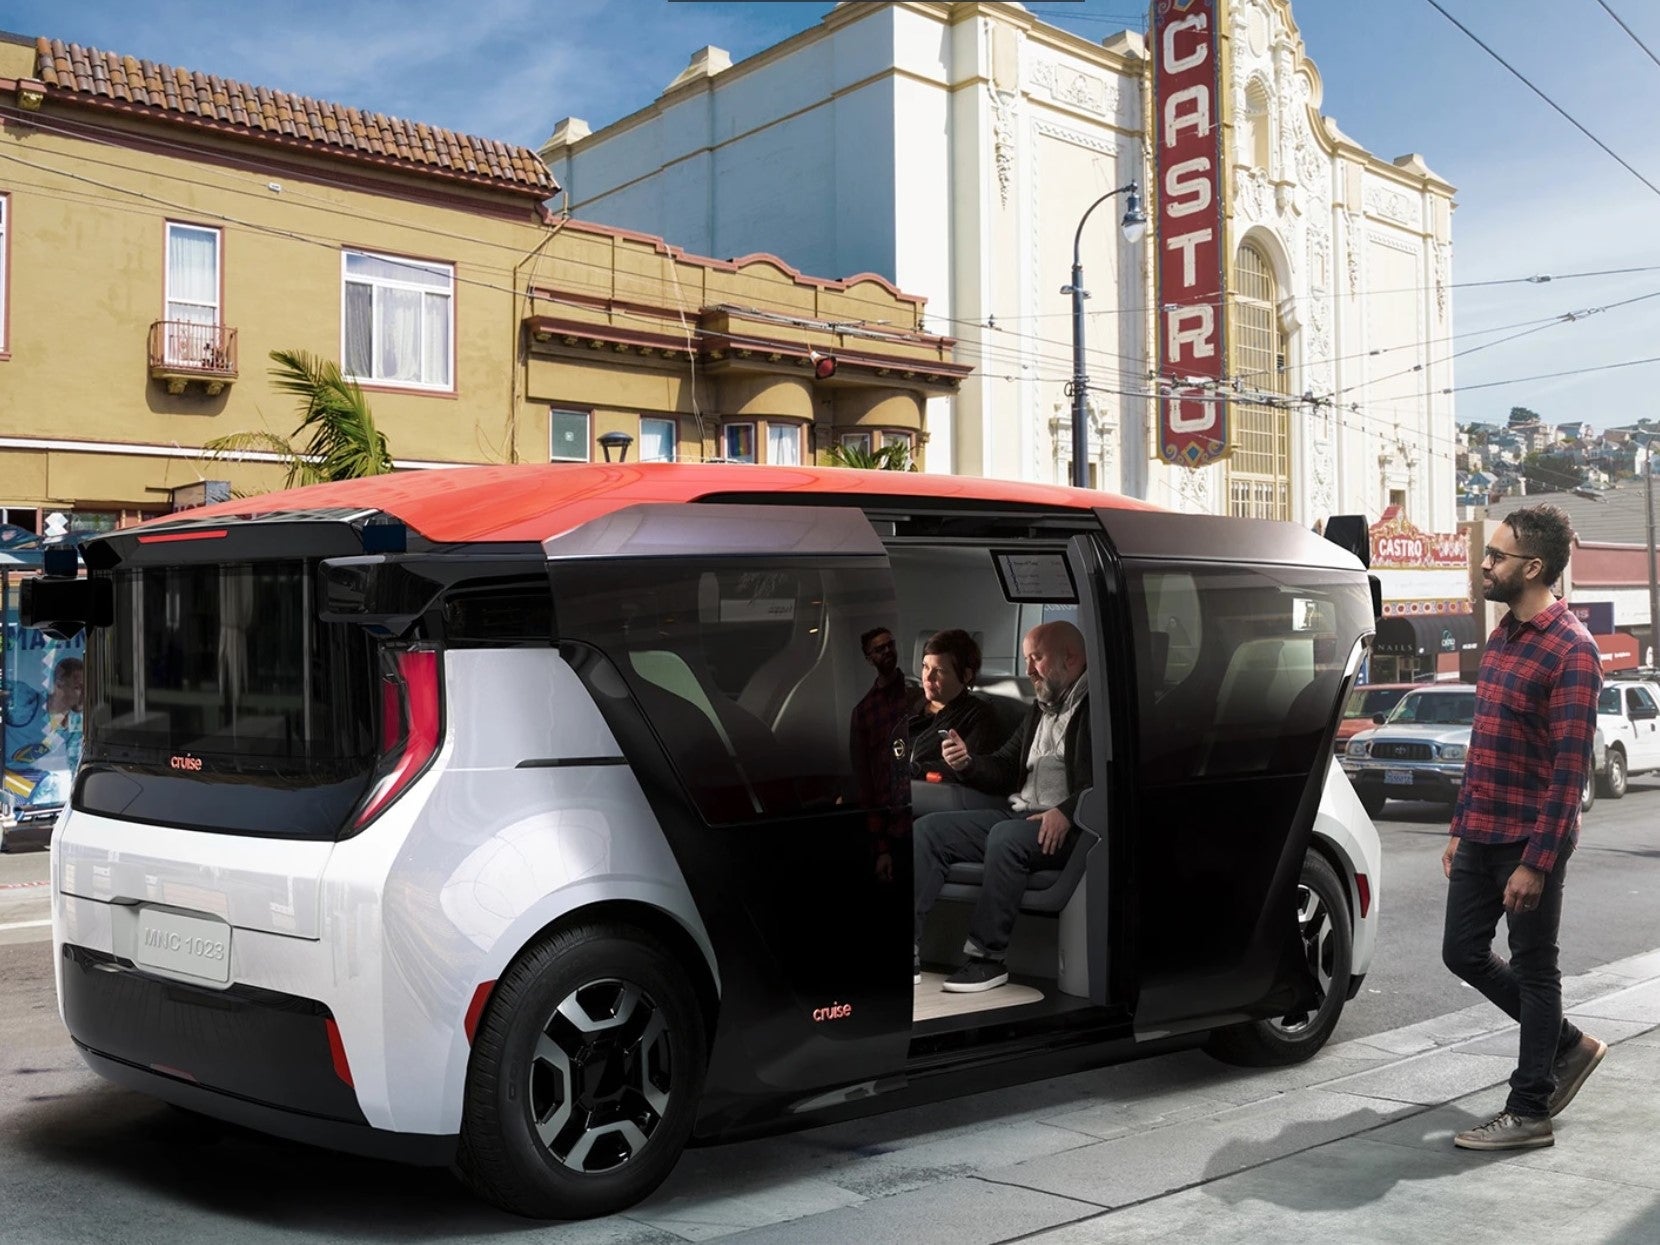 GM’s Cruise robo taxi will only be able to operate at night on uncongested roads in San Francisco, California